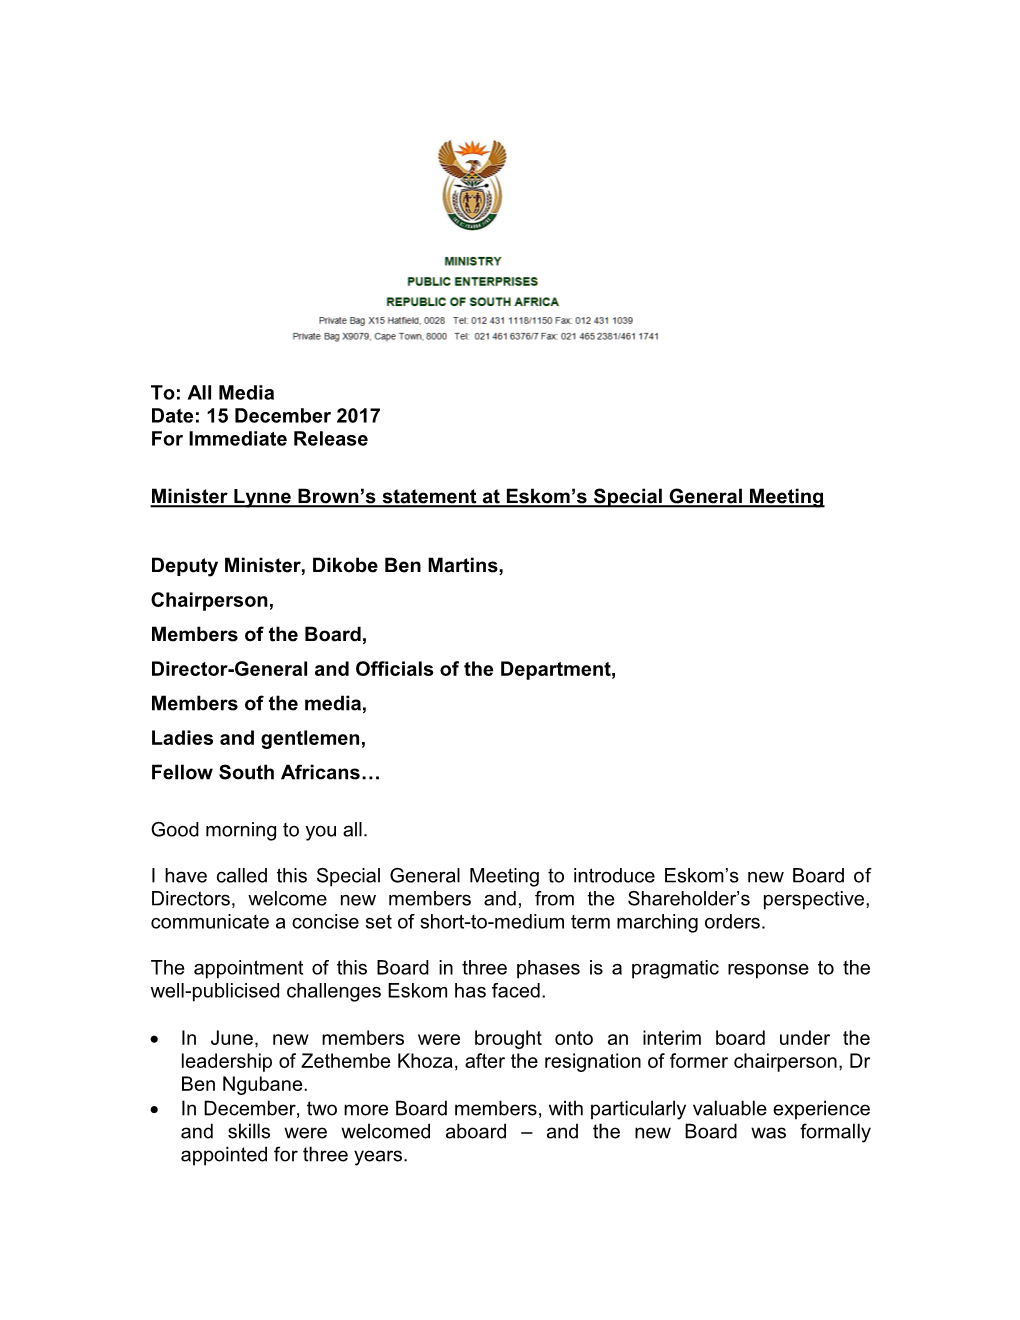 To: All Media Date: 15 December 2017 for Immediate Release